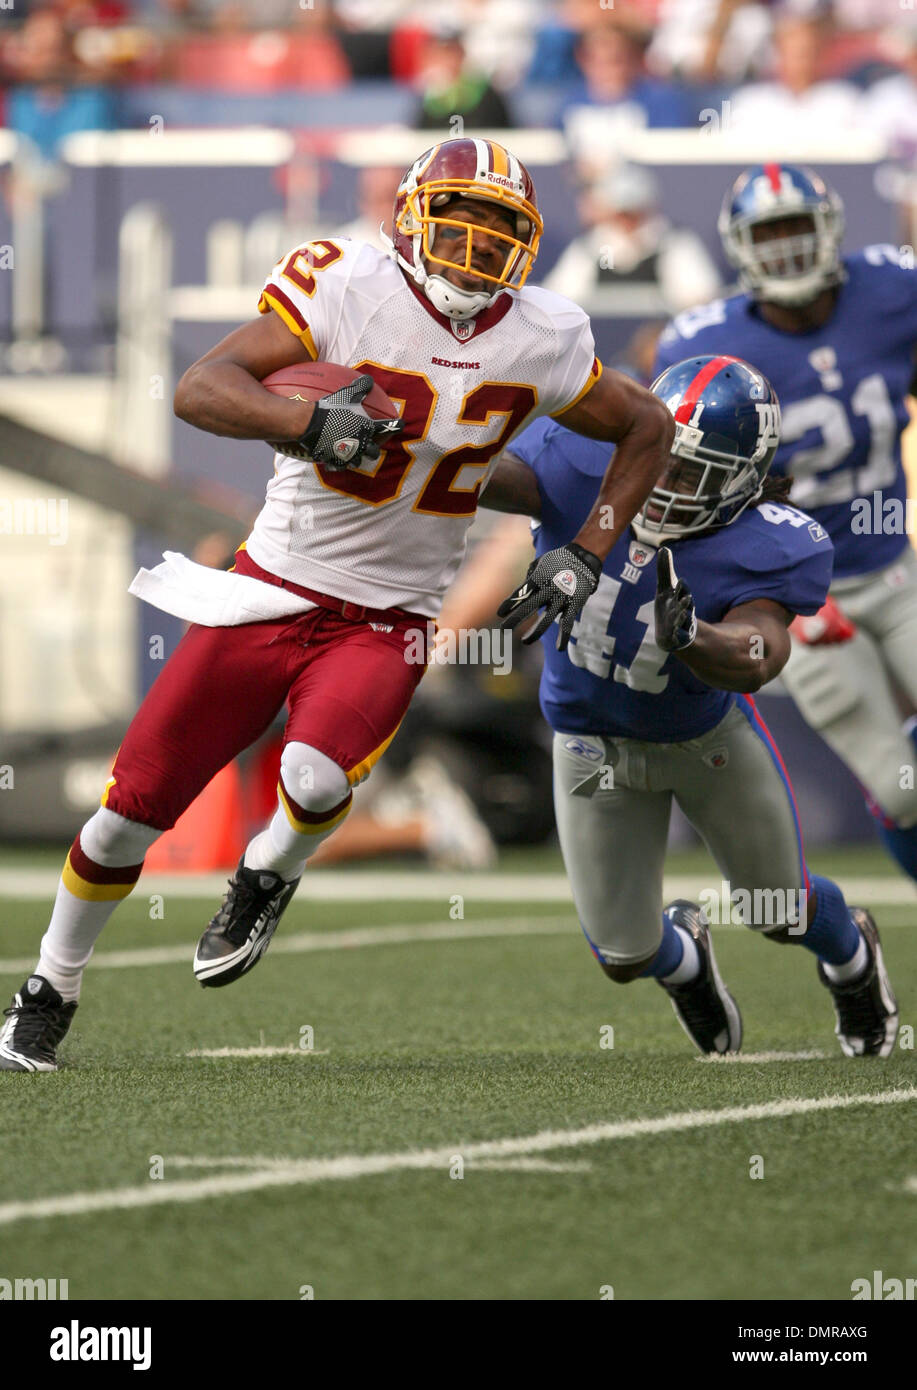 Redskins #82 Antwan Randle El evades tackle.    The New York Giants defeated the Washington Redskins 23-17 at Giants Stadium in Rutherford, New Jersey. (Credit Image: © Anthony Gruppuso/Southcreek Global/ZUMApress.com) Stock Photo